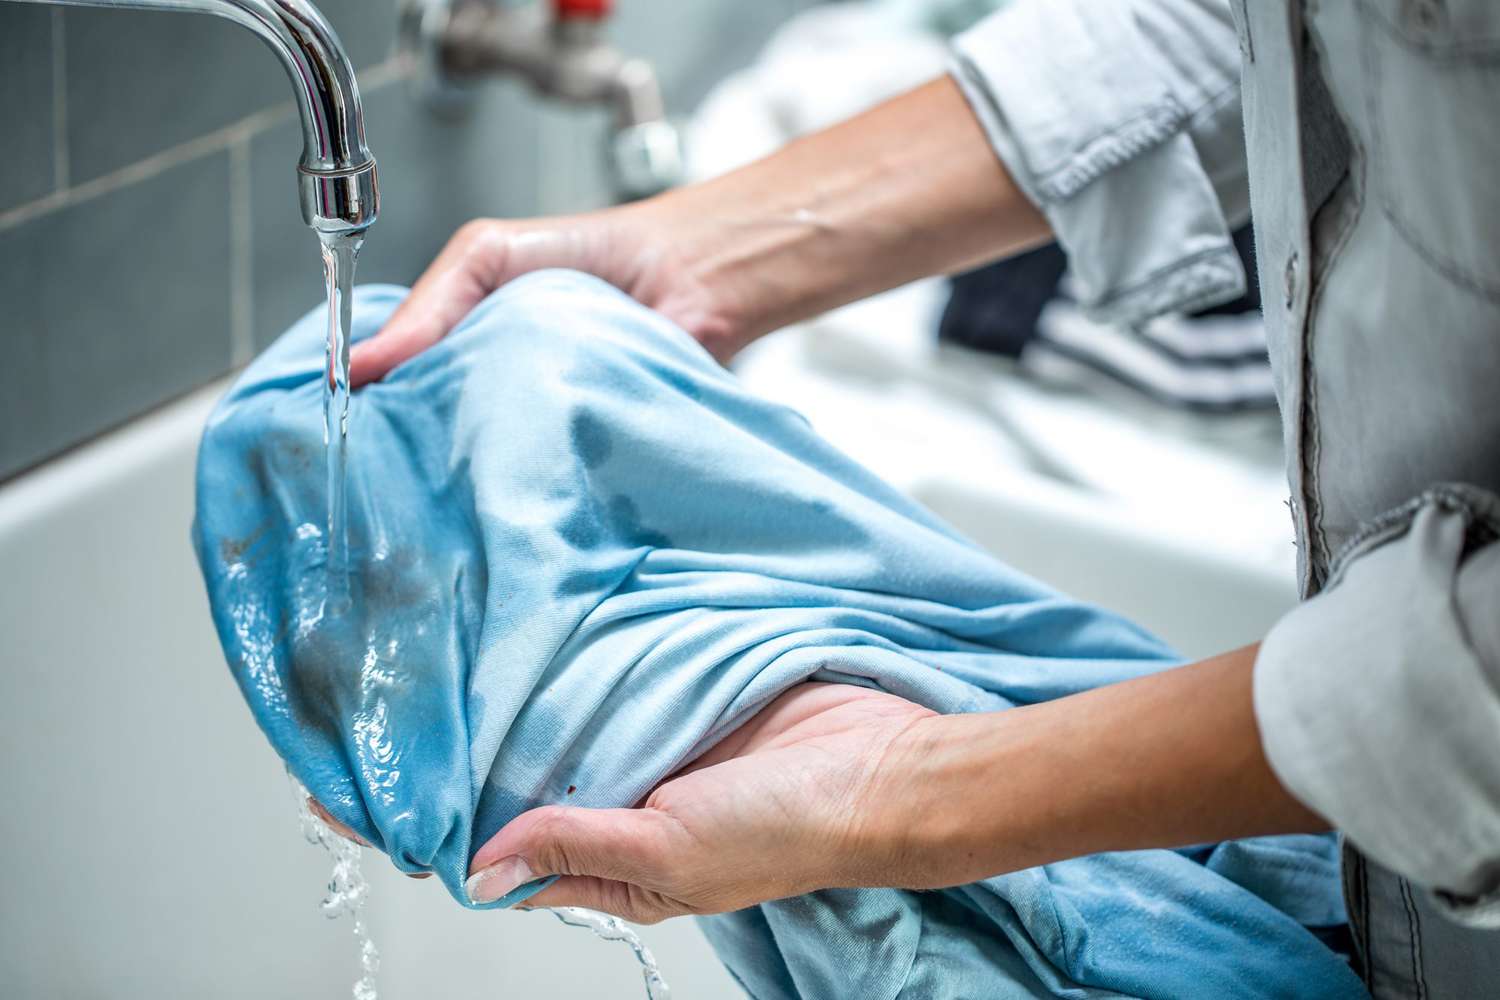 Woman Cleaning Stained Shirt in Bathroom Sink